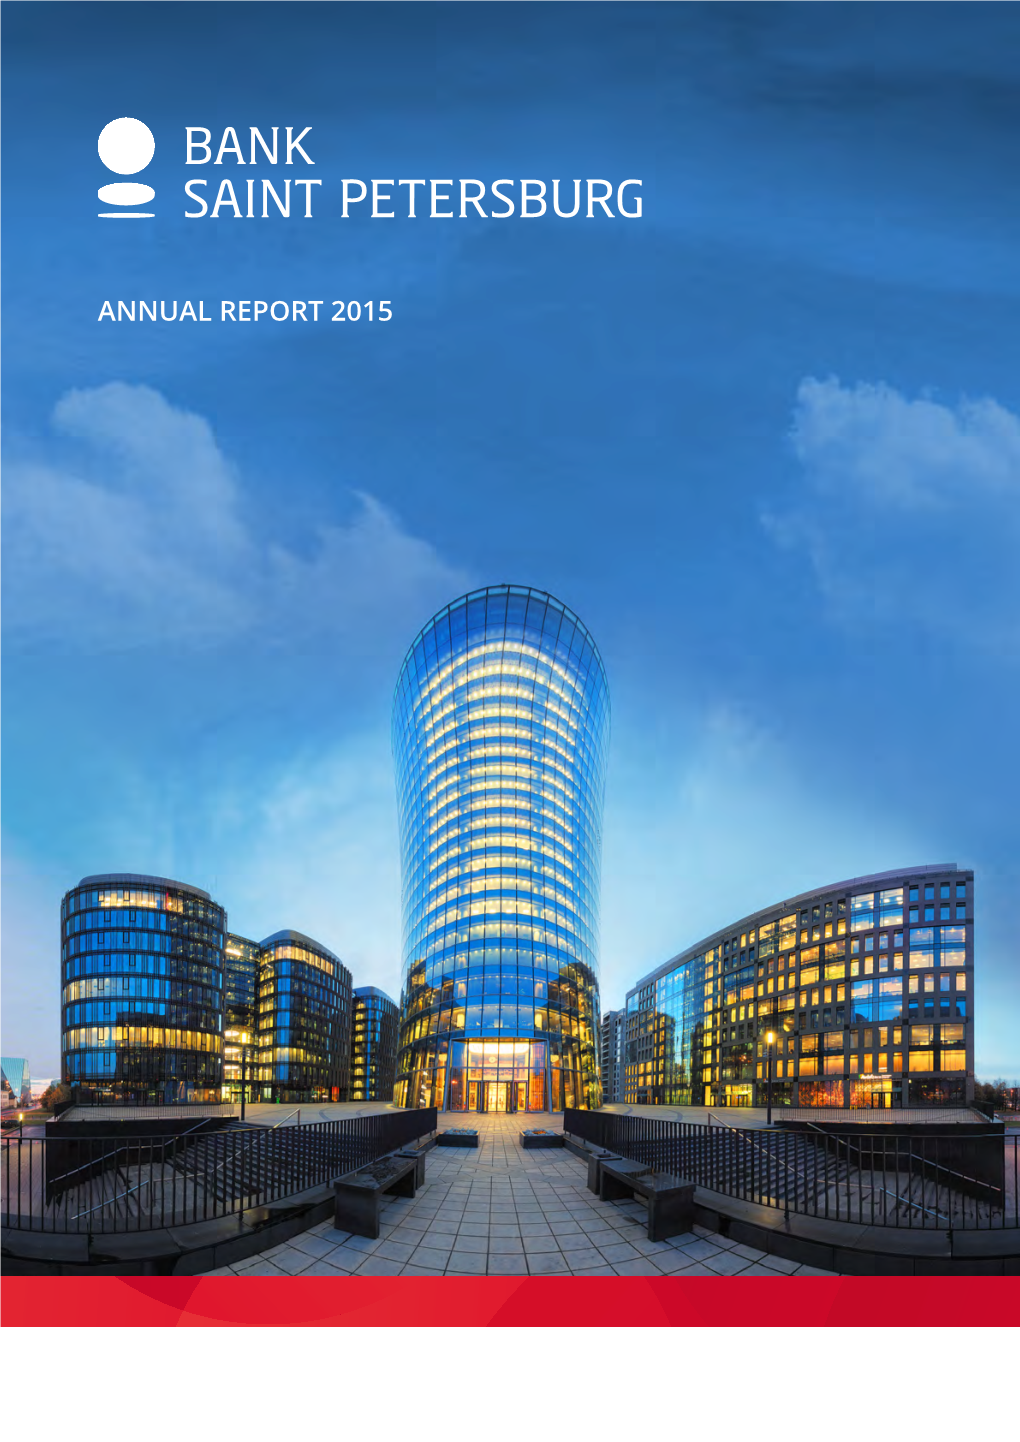 Annual Report 2015 Bank Saint Petersburg at a Glance